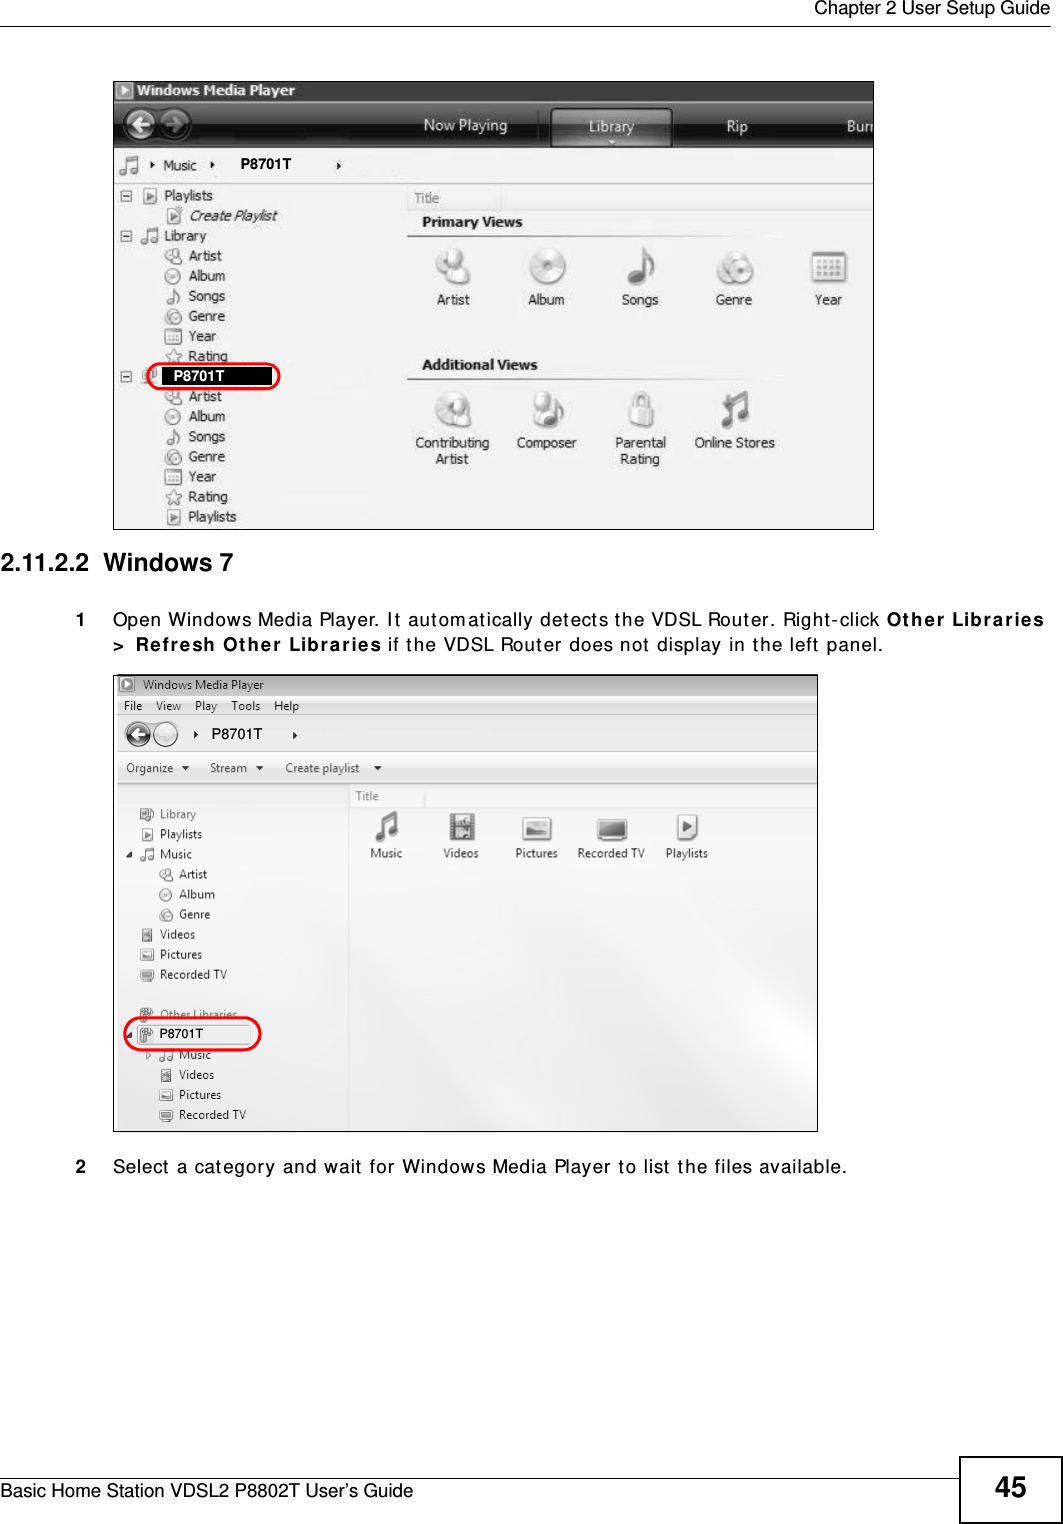  Chapter 2 User Setup GuideBasic Home Station VDSL2 P8802T User’s Guide 45Tutorial: Media Sharing using Windows Vista (3) 2.11.2.2  Windows 71Open Windows Media Player. I t aut om at ically detects t he VDSL Router . Right-click Ot her Libr aries &gt;  Re fr esh Ot her  Librar ies if t he VDSL Rout er does not  display in the left panel.Tutorial: Media Sharing using Windows 7 (1)2Select  a category and wait for Windows Media Player to list the files available.  P8701TP8701TP8701TP8701T